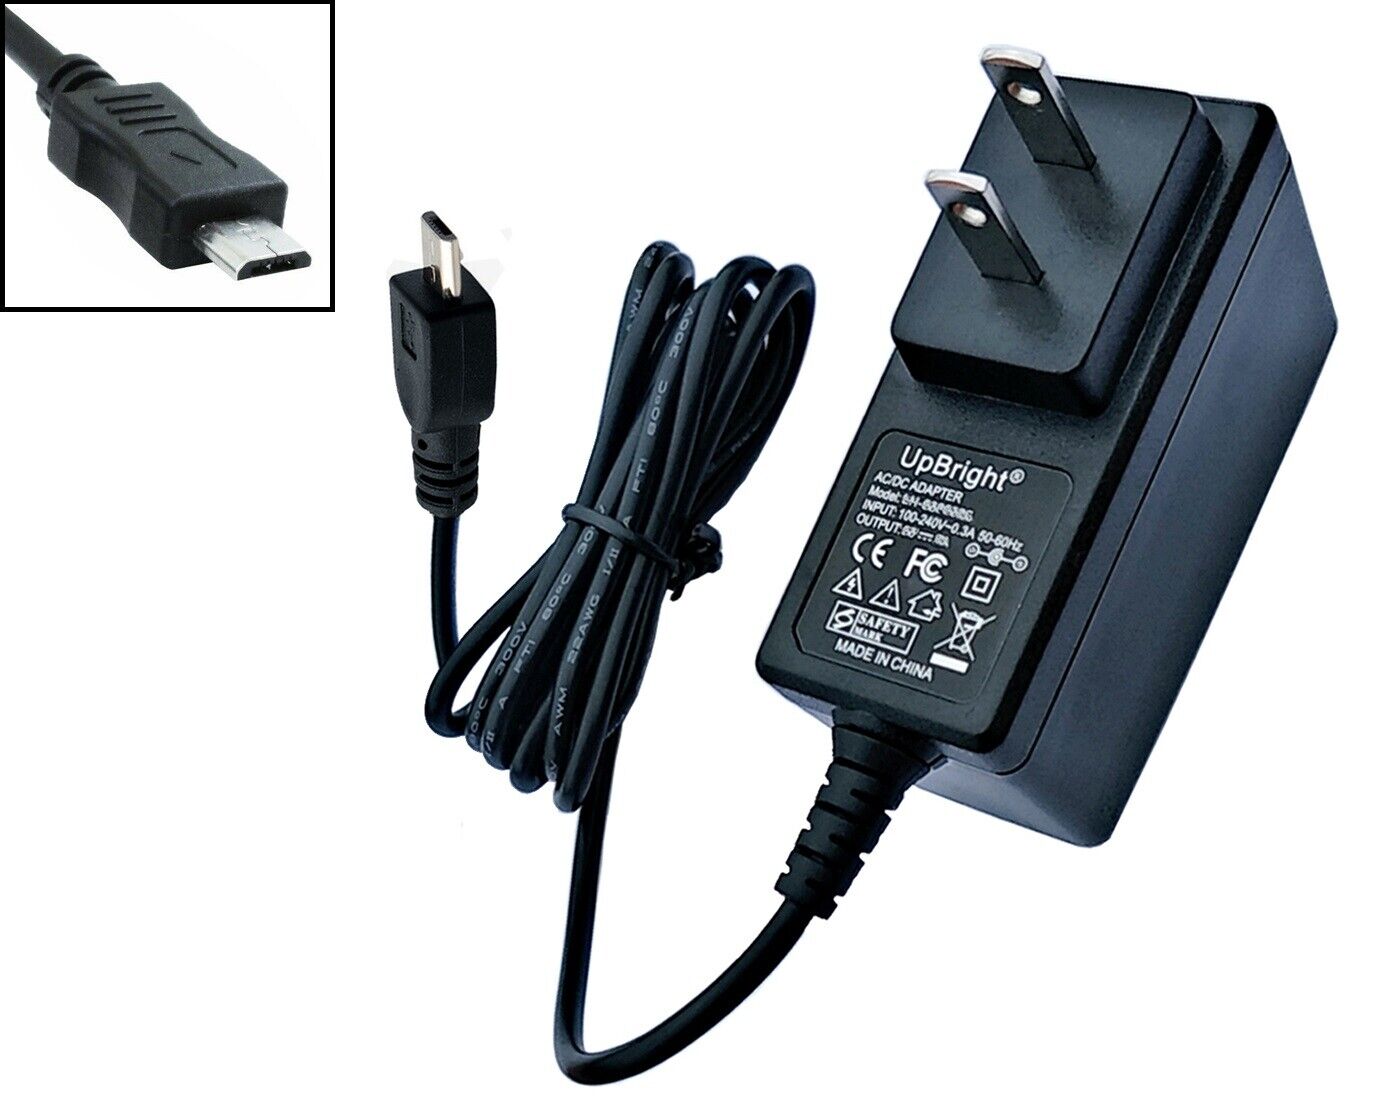 AC Adapter or USB DC Cable For Altec Lansing LifeJacket XL Jolt IMW790 Speaker